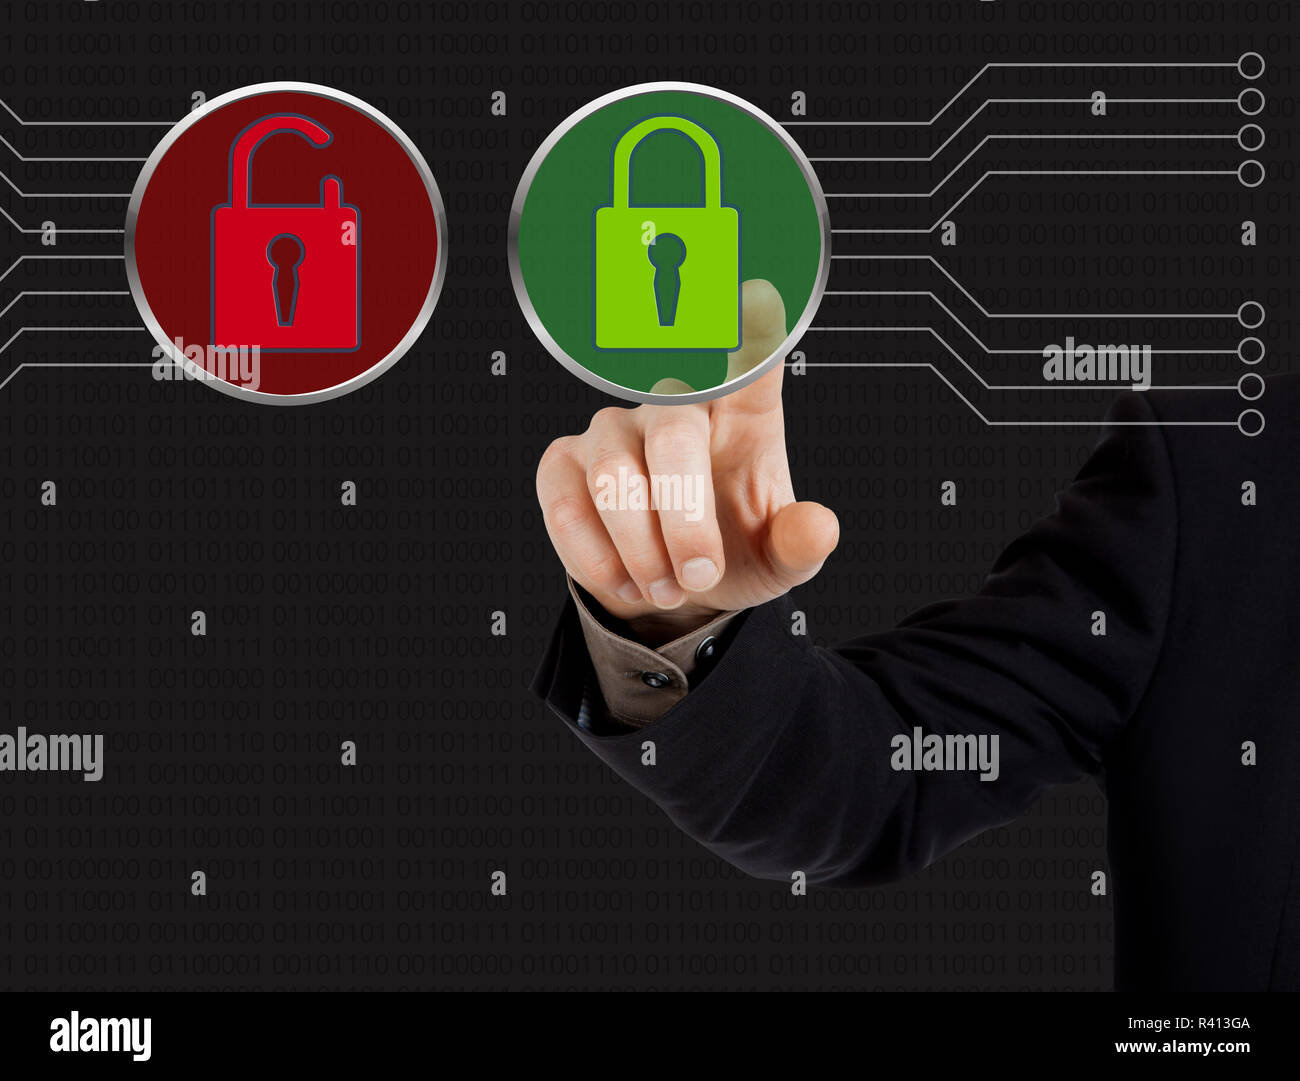 Hand pushing virtual security button Stock Photo